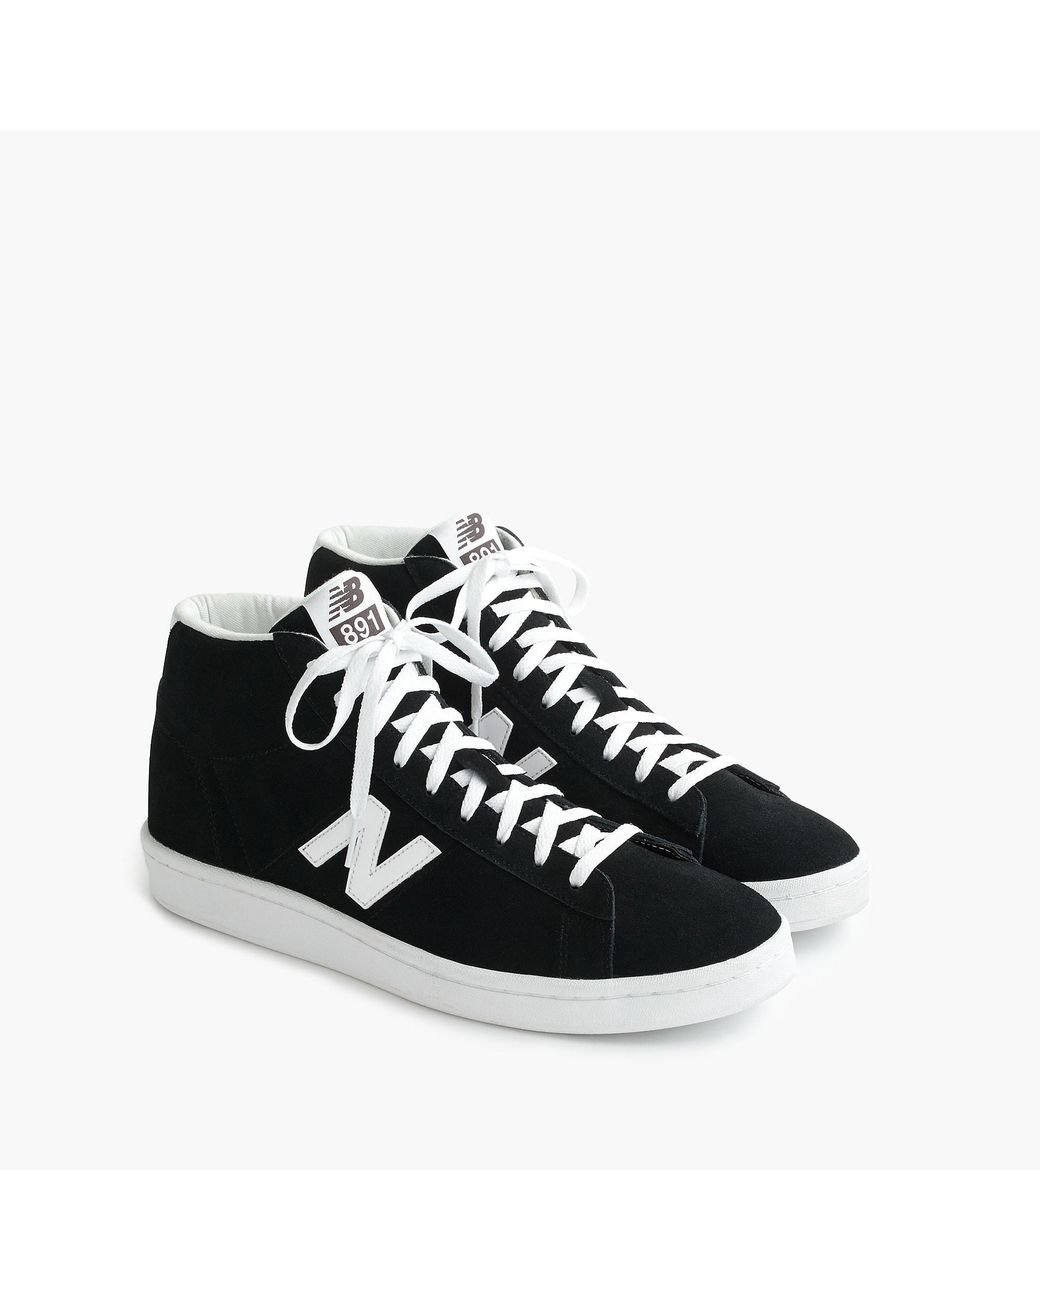 New Balance ® For J.crew 891 Sneakers in Black for Men | Lyst